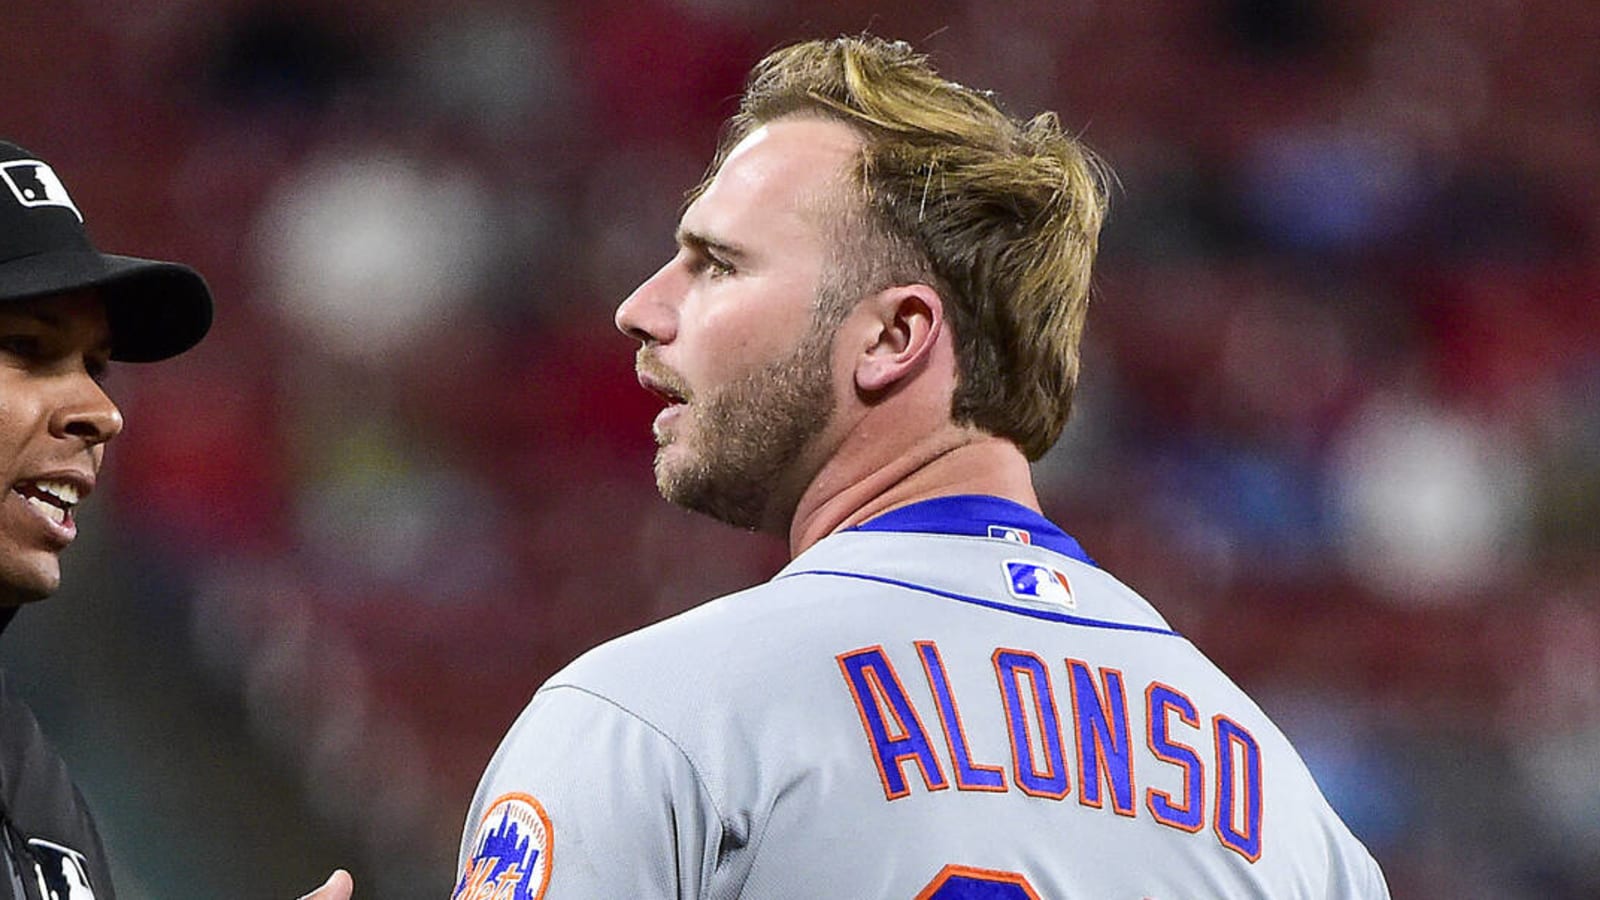 Peter Alonso happy with UF choice